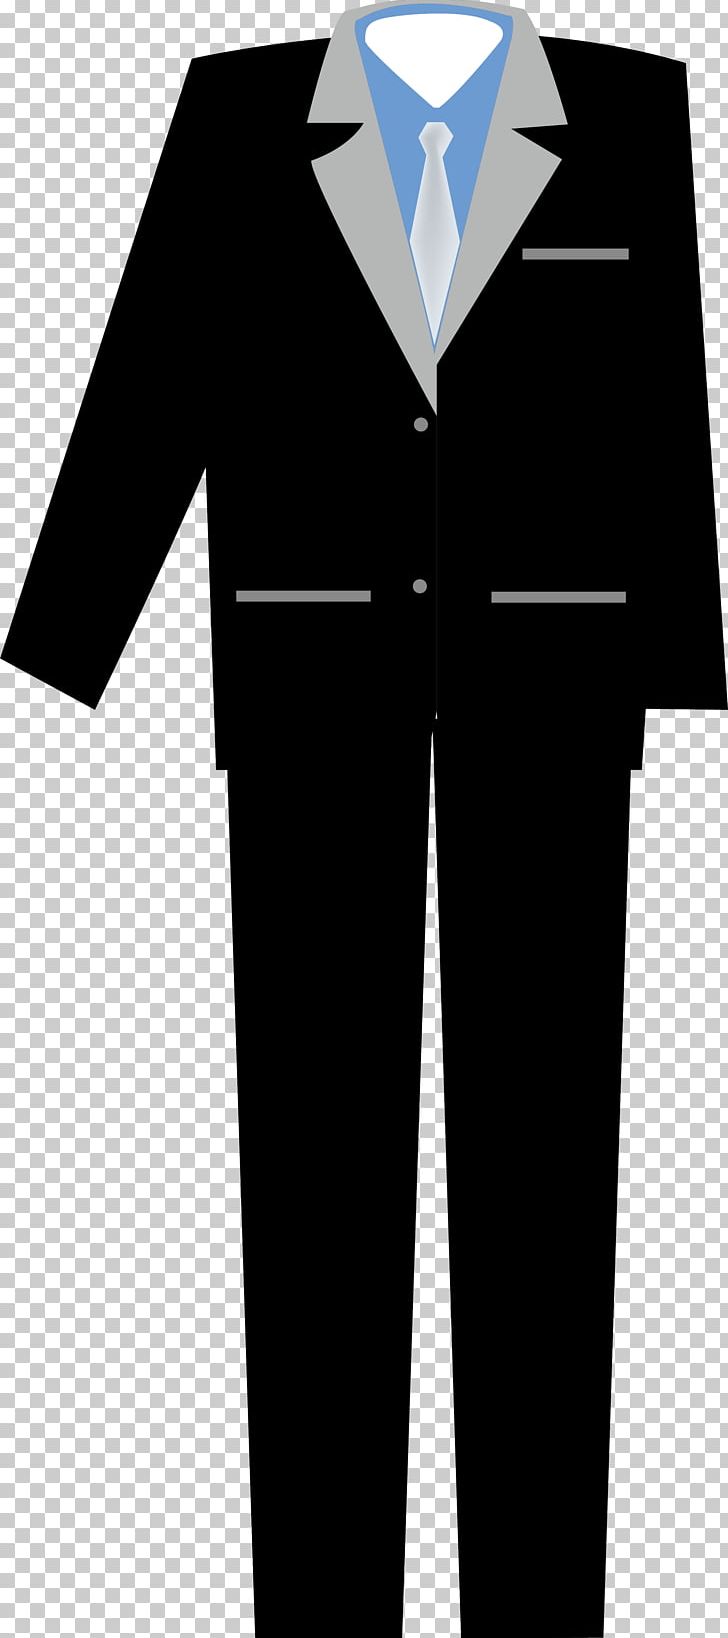 Robe Tuxedo Clothing Uniform Suit PNG, Clipart, Black, Black And White, Black Suit, Brand, Cargo Pants Free PNG Download